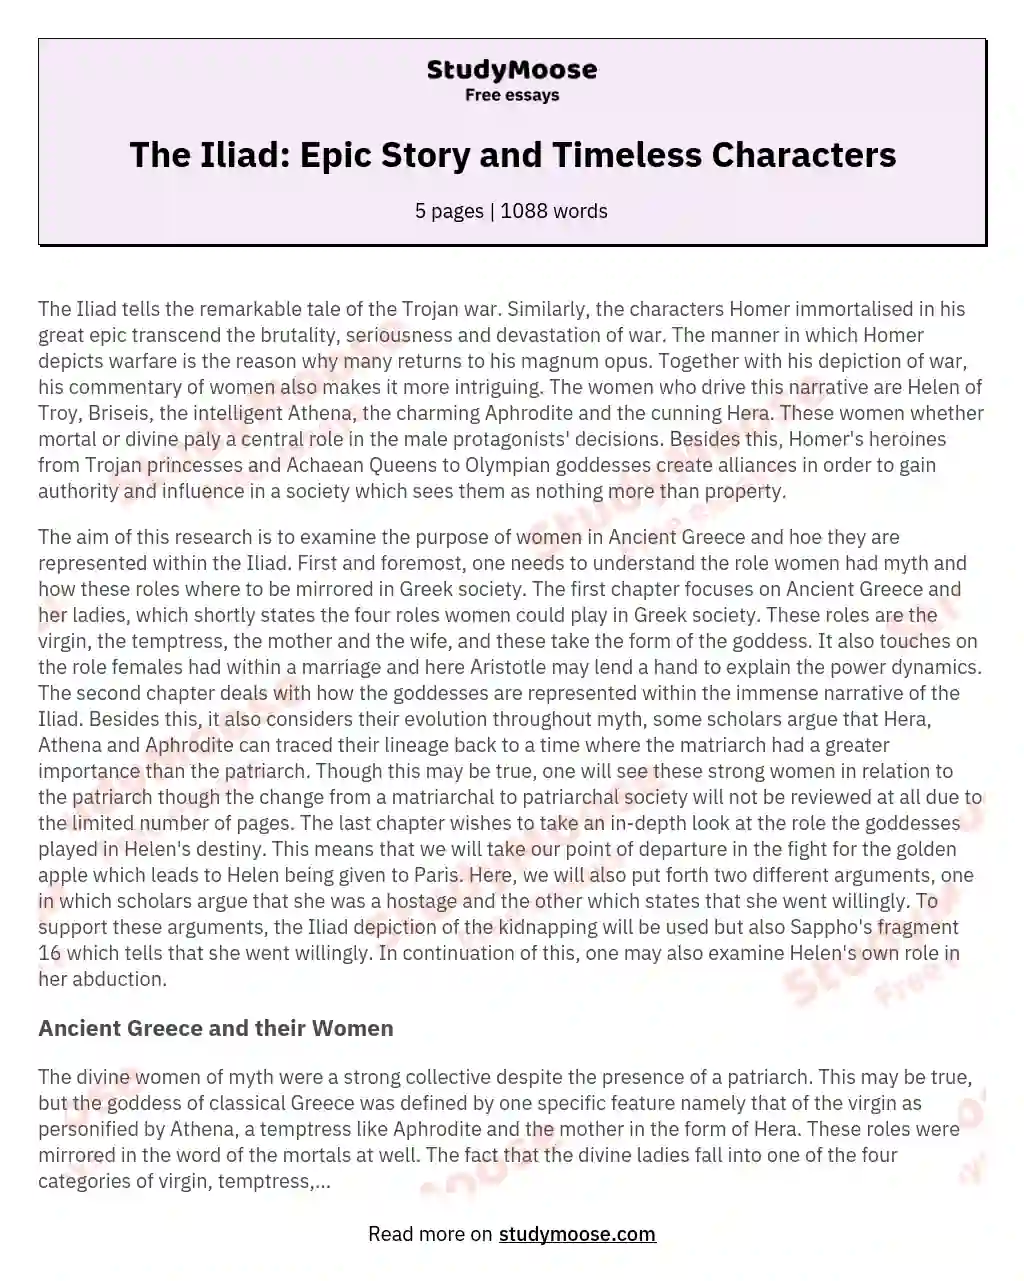 The Iliad: Epic Story and Timeless Characters